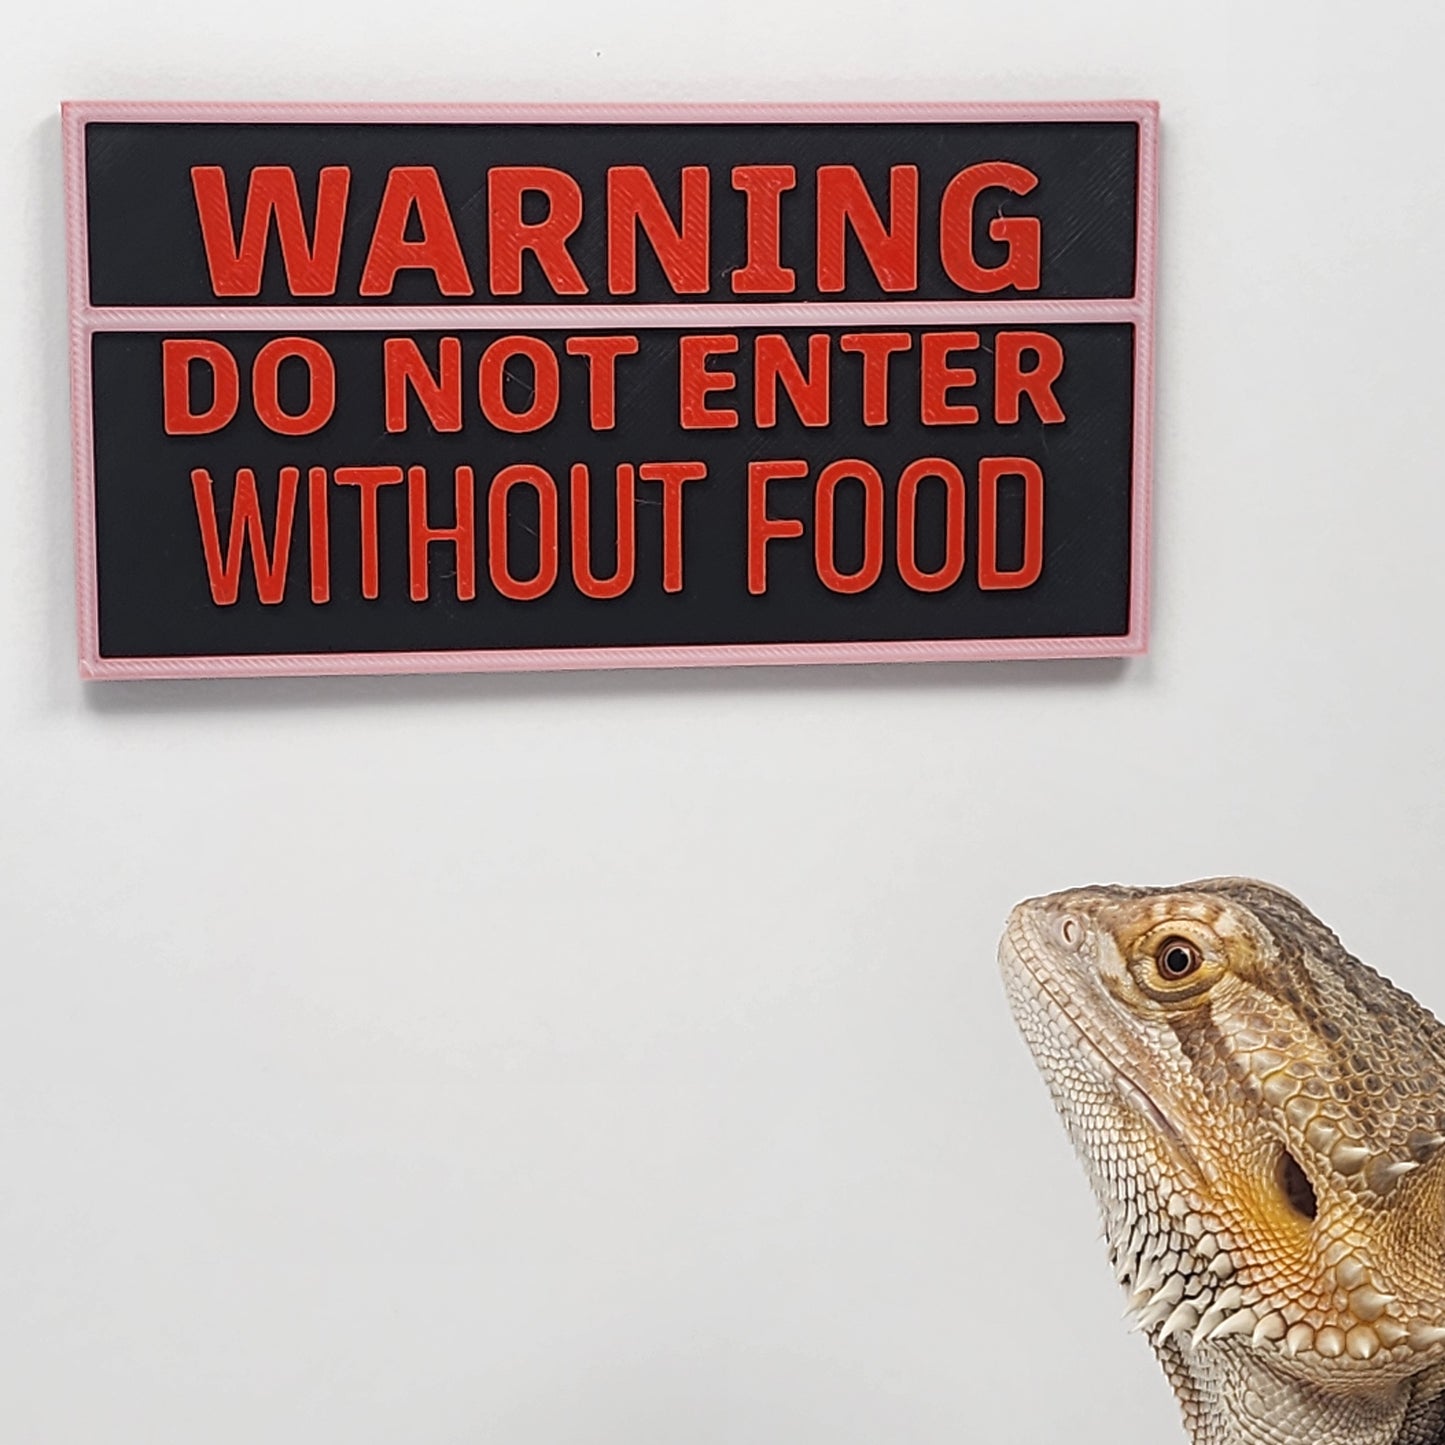 Funny Bearded Dragon Decor for small pet cages | Warning Do not enter without food |Pet cage decor